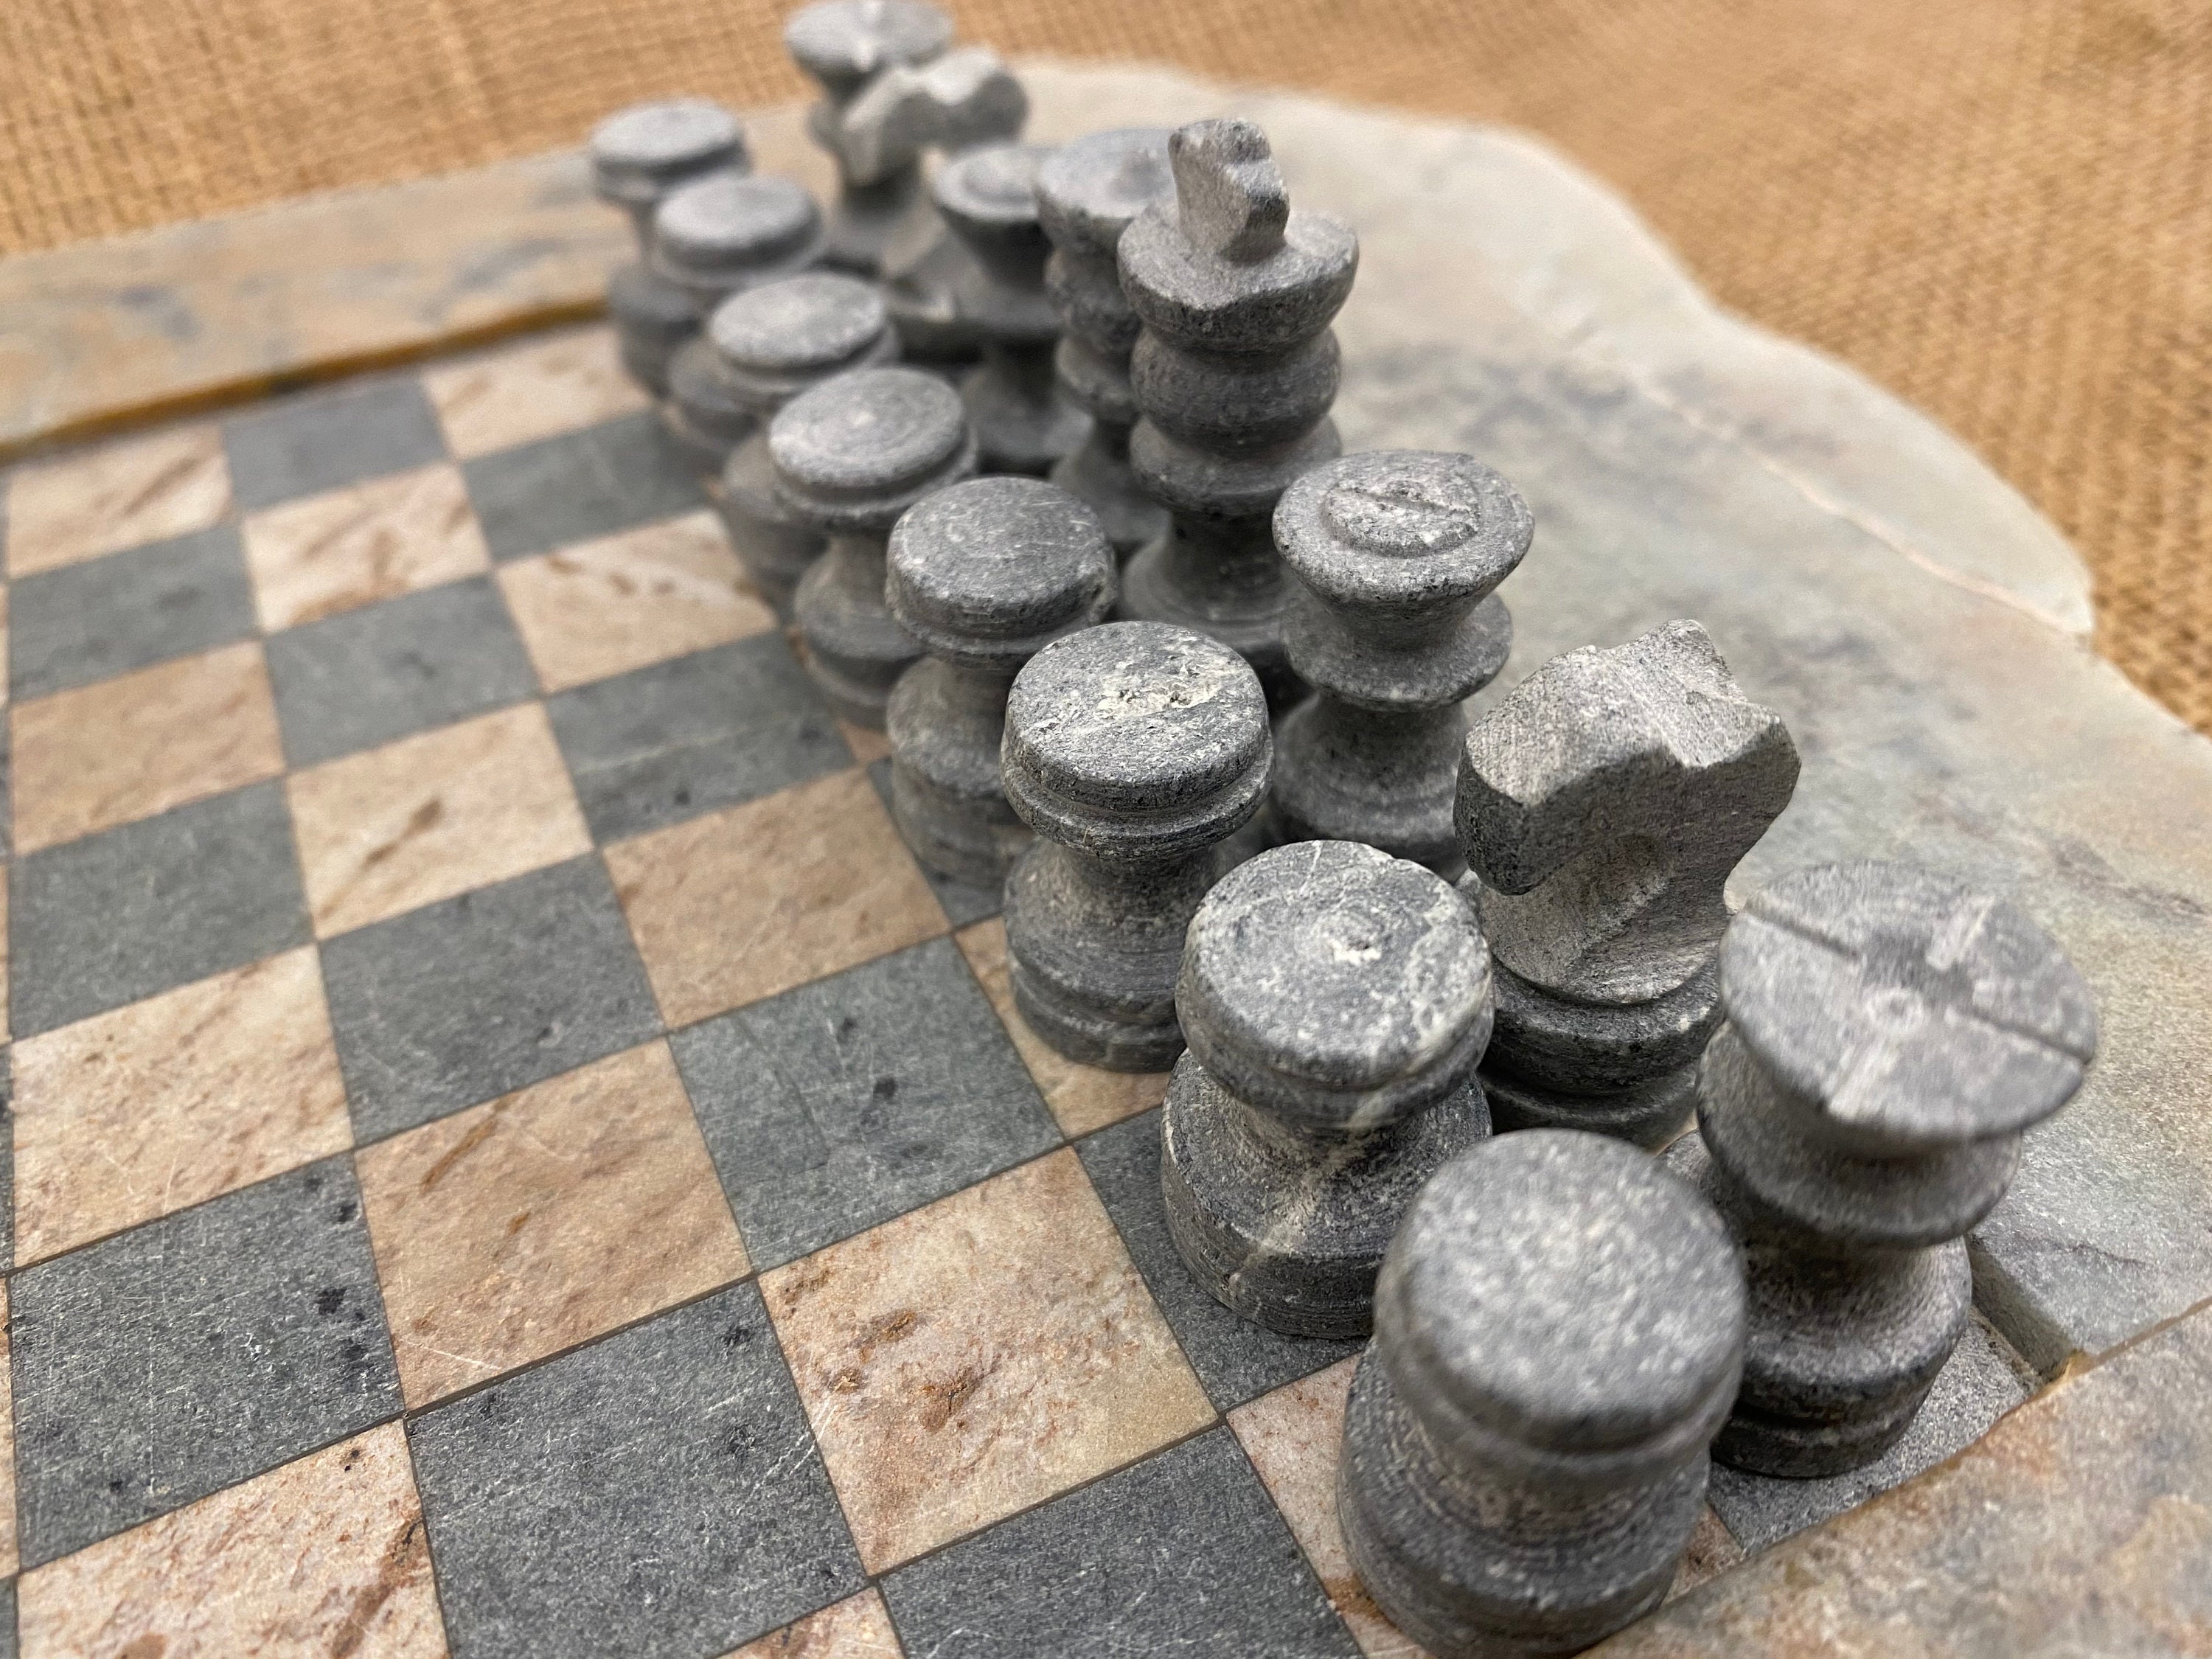 Unique Chess Set From Brazil. Beautiful Natural Stone Design 